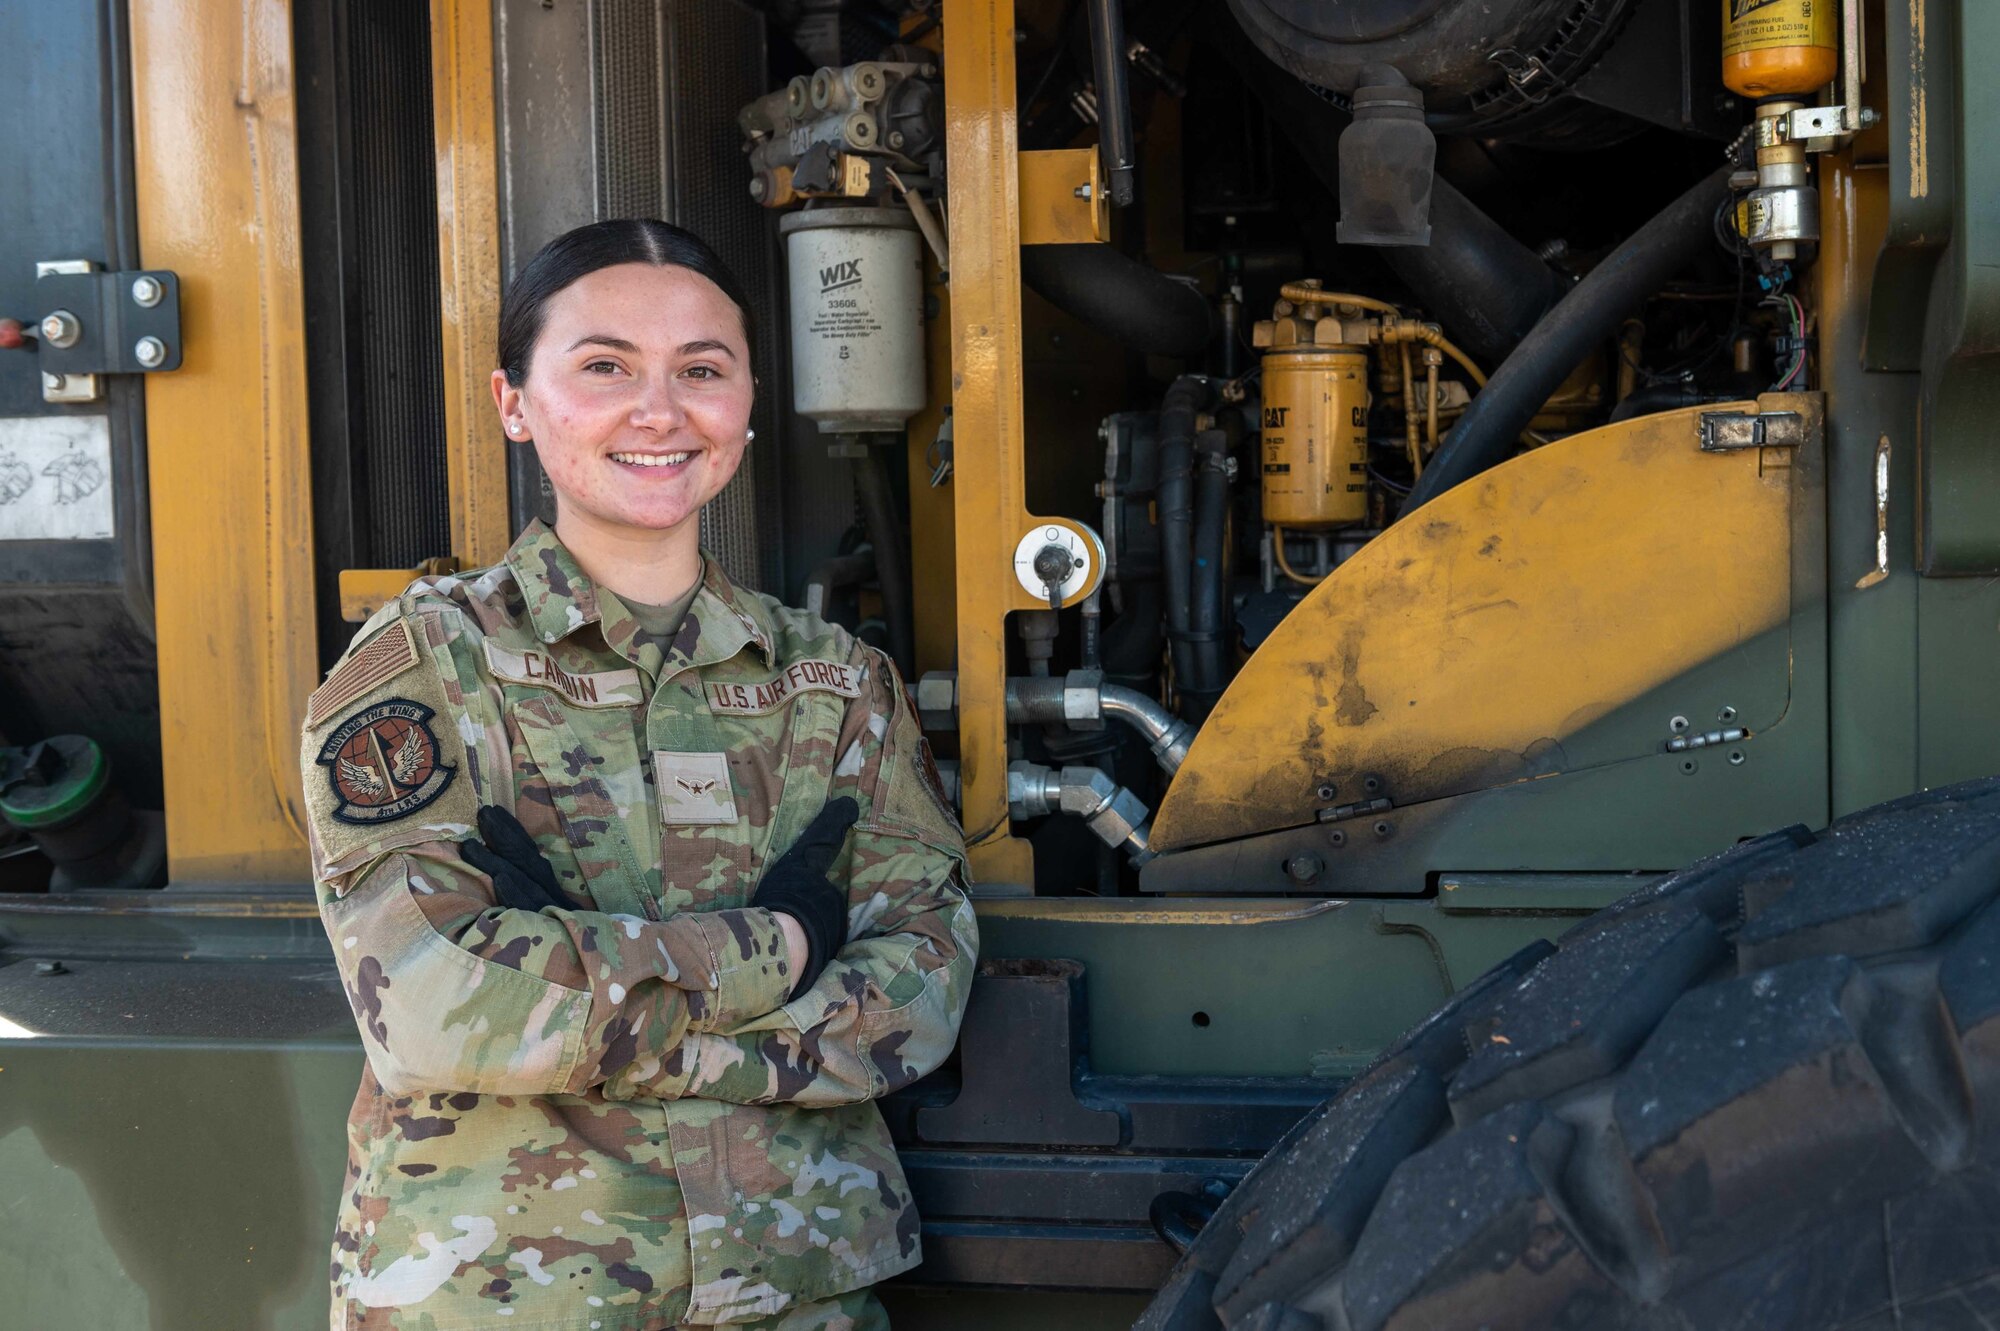 Airman Jasmine Cardin, 4th Logistics Readiness Squadron ground transportation vehicle operator, poses in front of a 10K All Terrain forklift at Seymour Johnson Air Force Base, North Carolina Dec. 3, 2021. The 4th LRS is one of the 4th Mission Support Group’s most diverse squadrons with more than 375 Airmen and civilians in eight Air Force Specialty Codes. (U.S. Air Force photo by Airman 1st Class Sabrina Fuller)